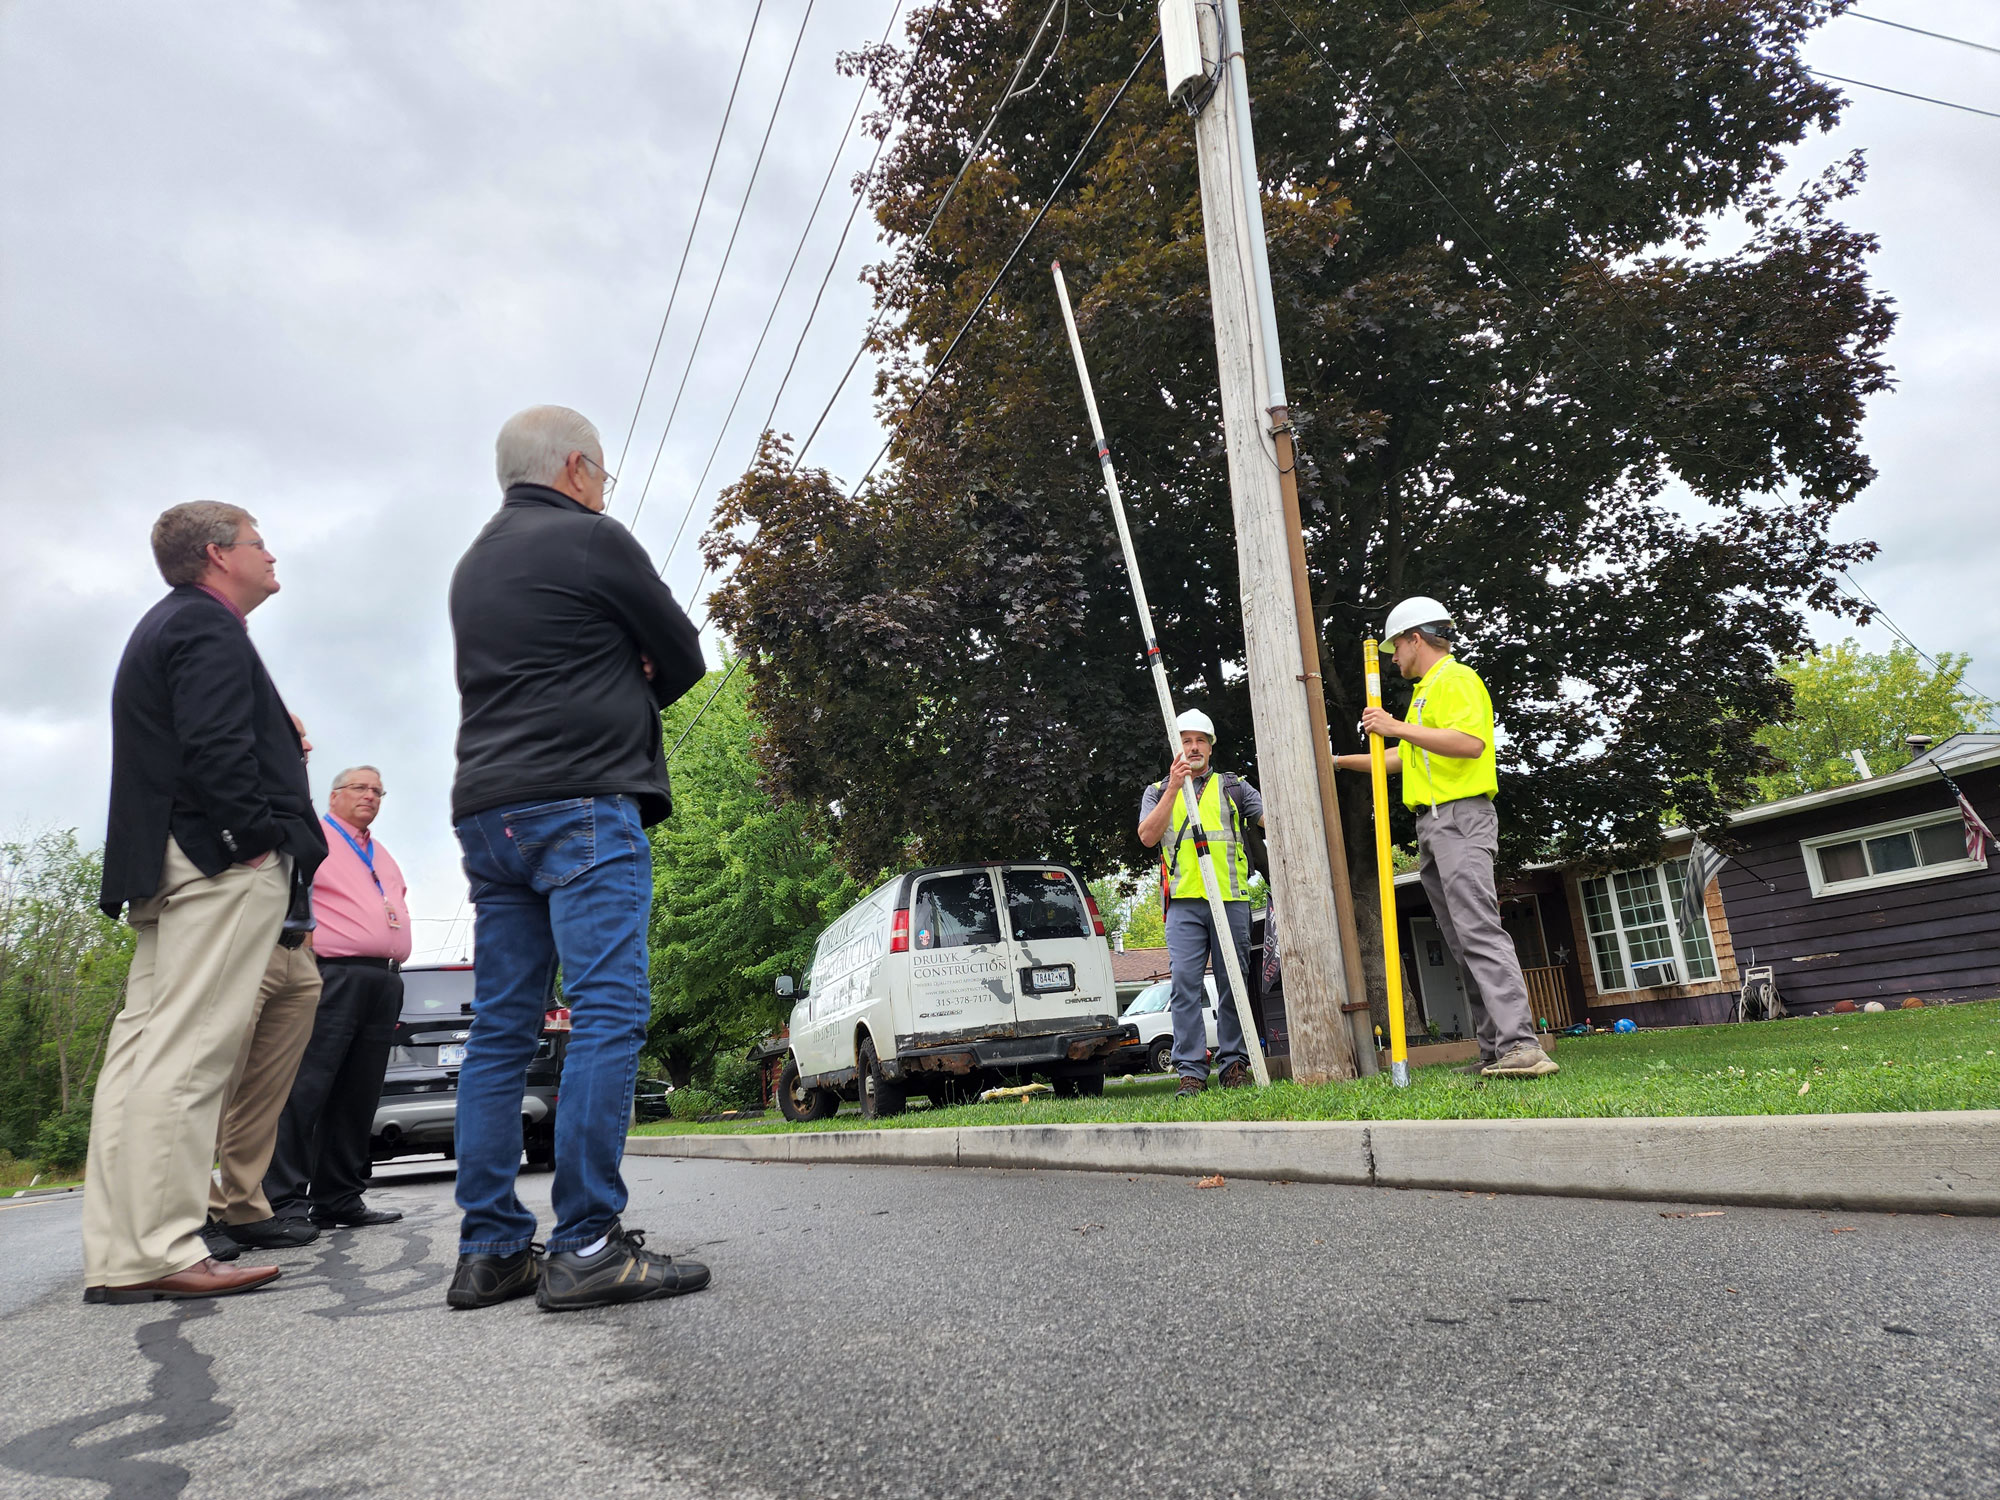 State Director Brian Murray visits with and hears from Madison County Chairman John Becker, Town Supervisors Pinard and Scimone – and also speaks with project engineers in Wampsville, NY